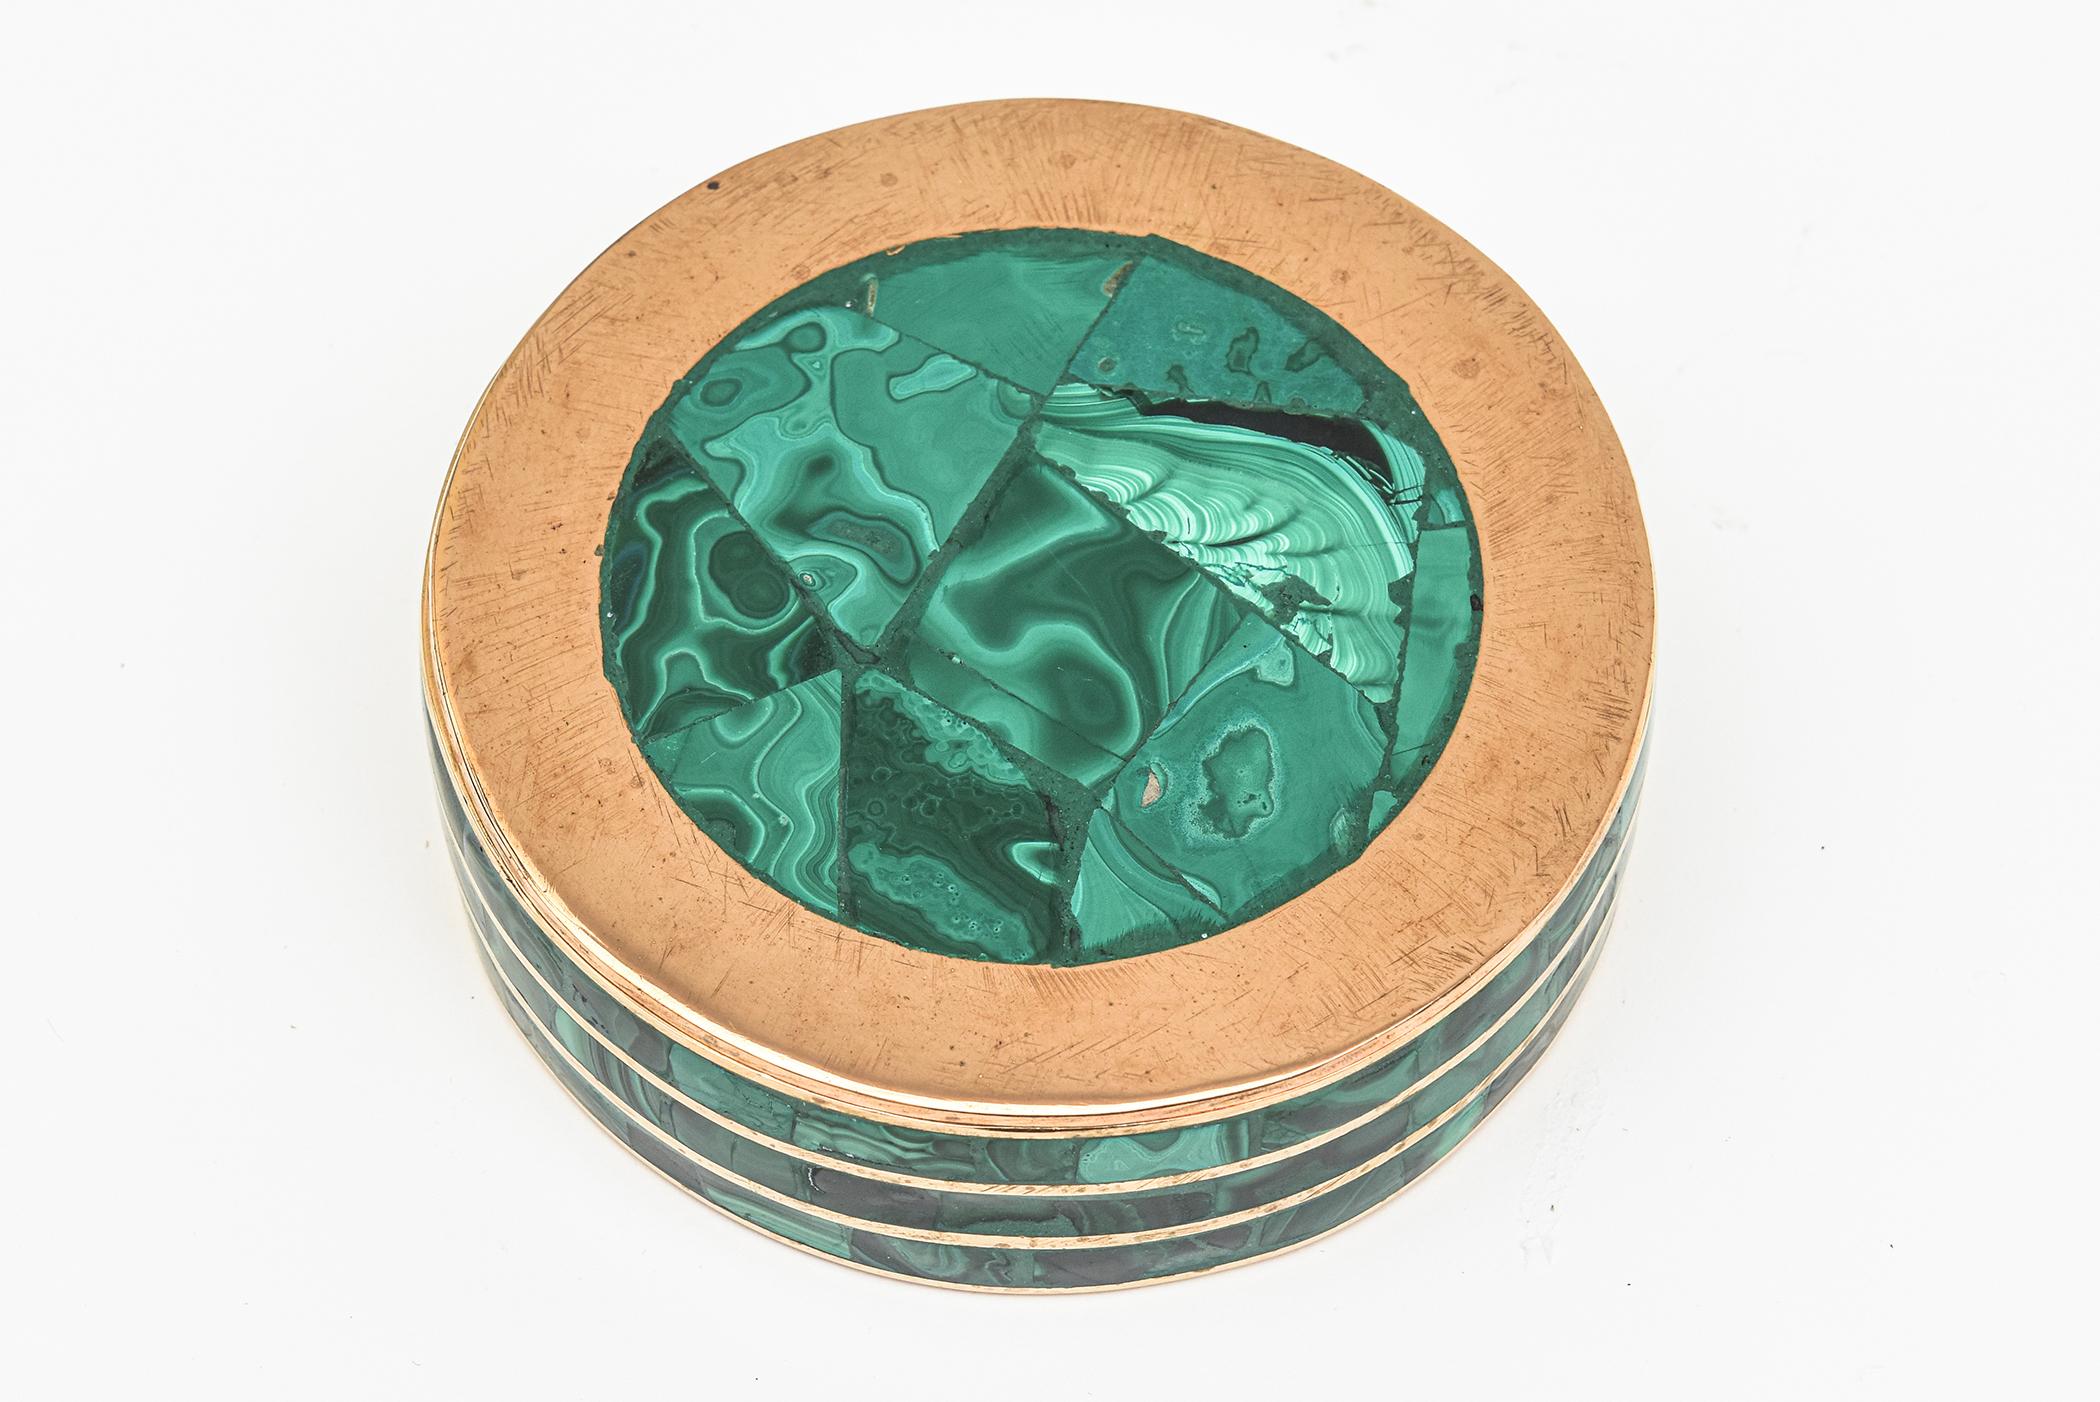 This lovely and substantial malachite and bronze vintage box is 2 parts. The bronze embedded lines form the perimeter set against the malachite. This makes a great desk accessory and is very rich looking. It is from the 1960s. it has good weight to